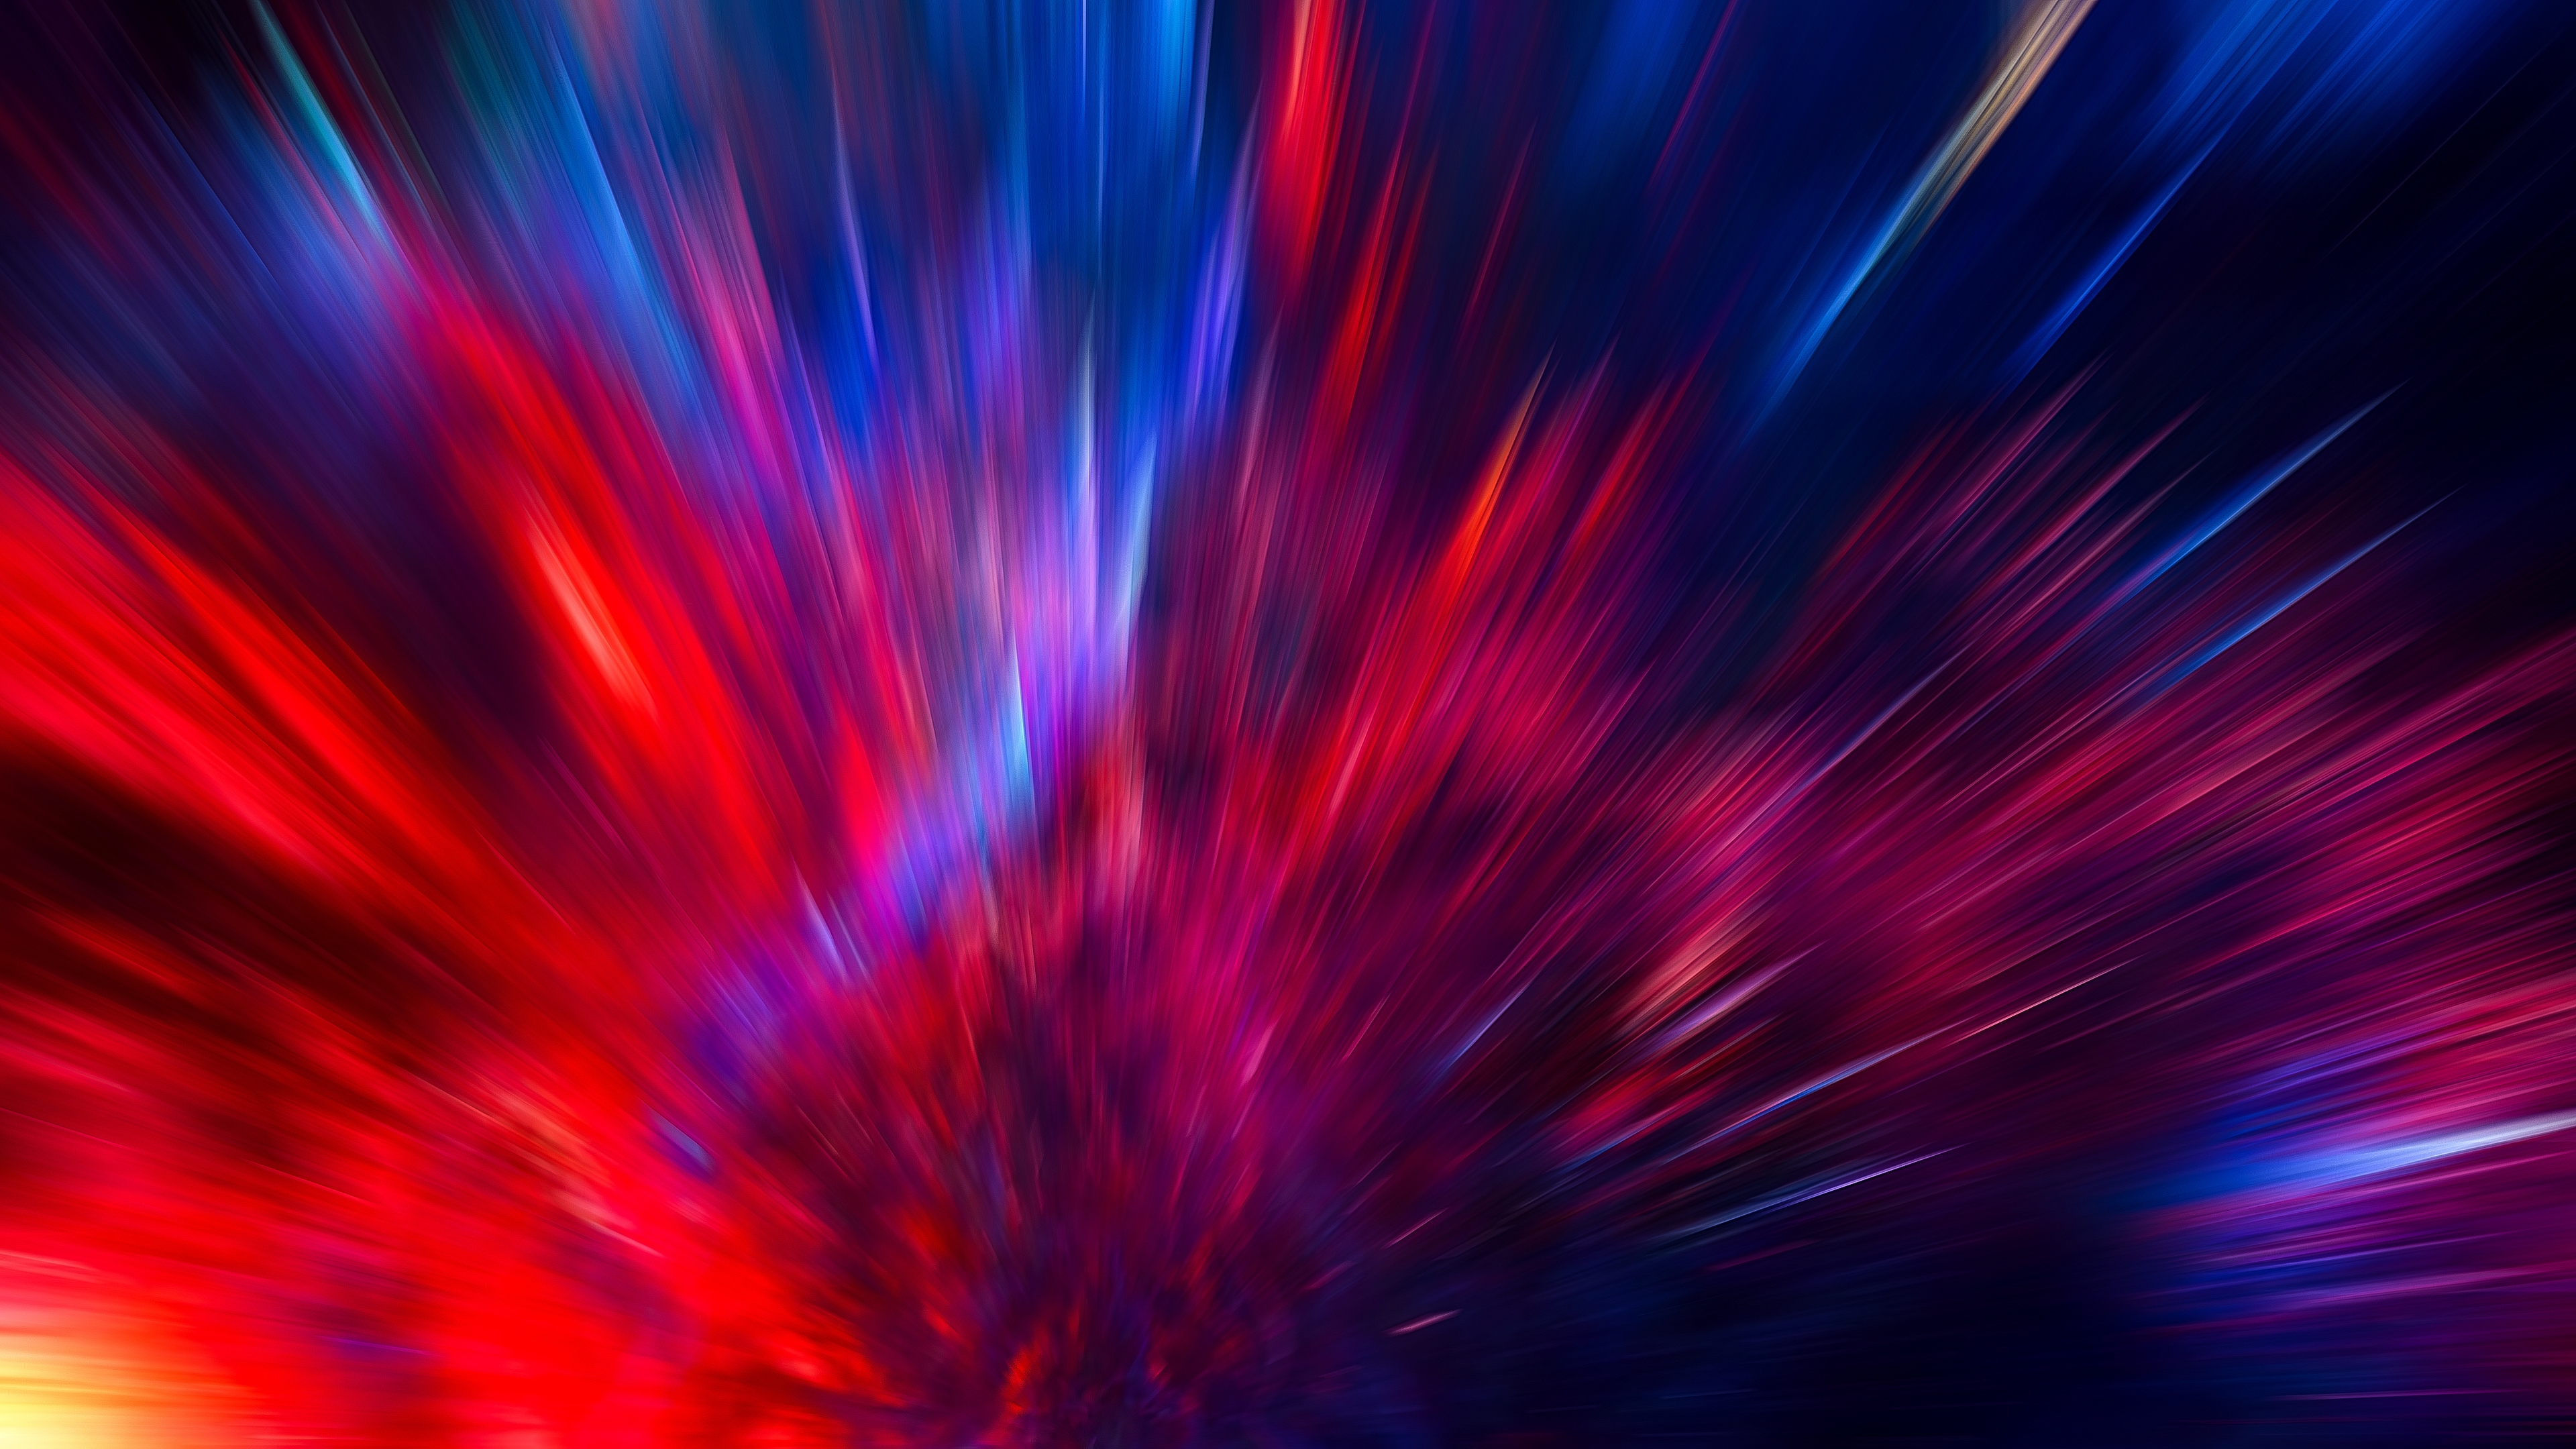 Wallpapers color explosion neon colors red and blue on the desktop